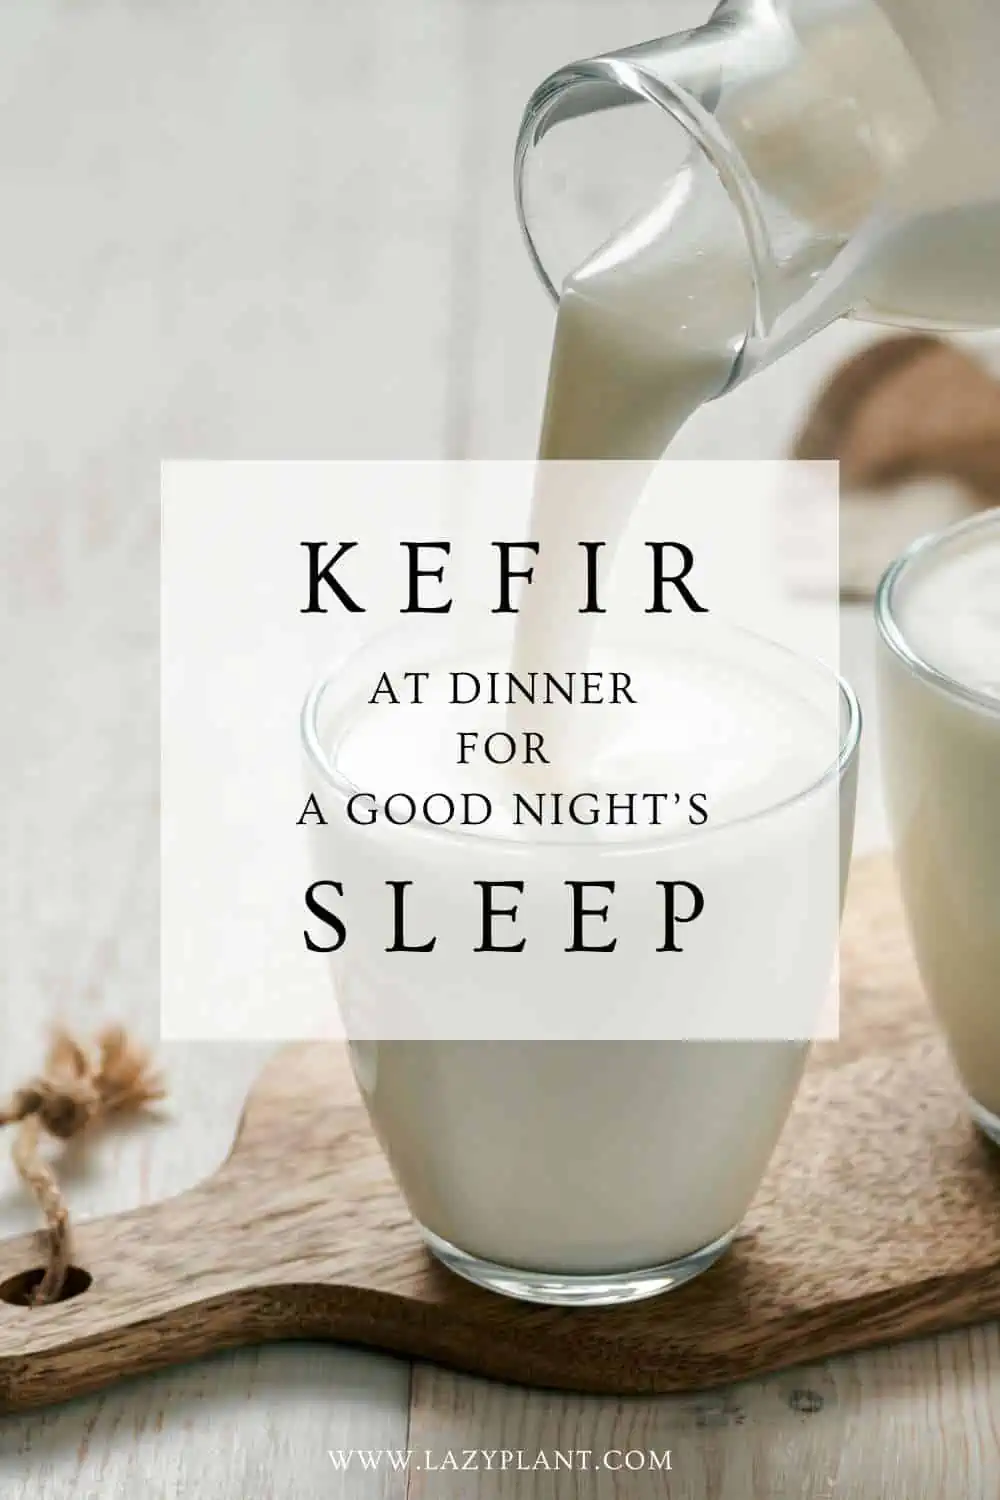 18 reasons why kefir is the healthiest food to consume before bed.